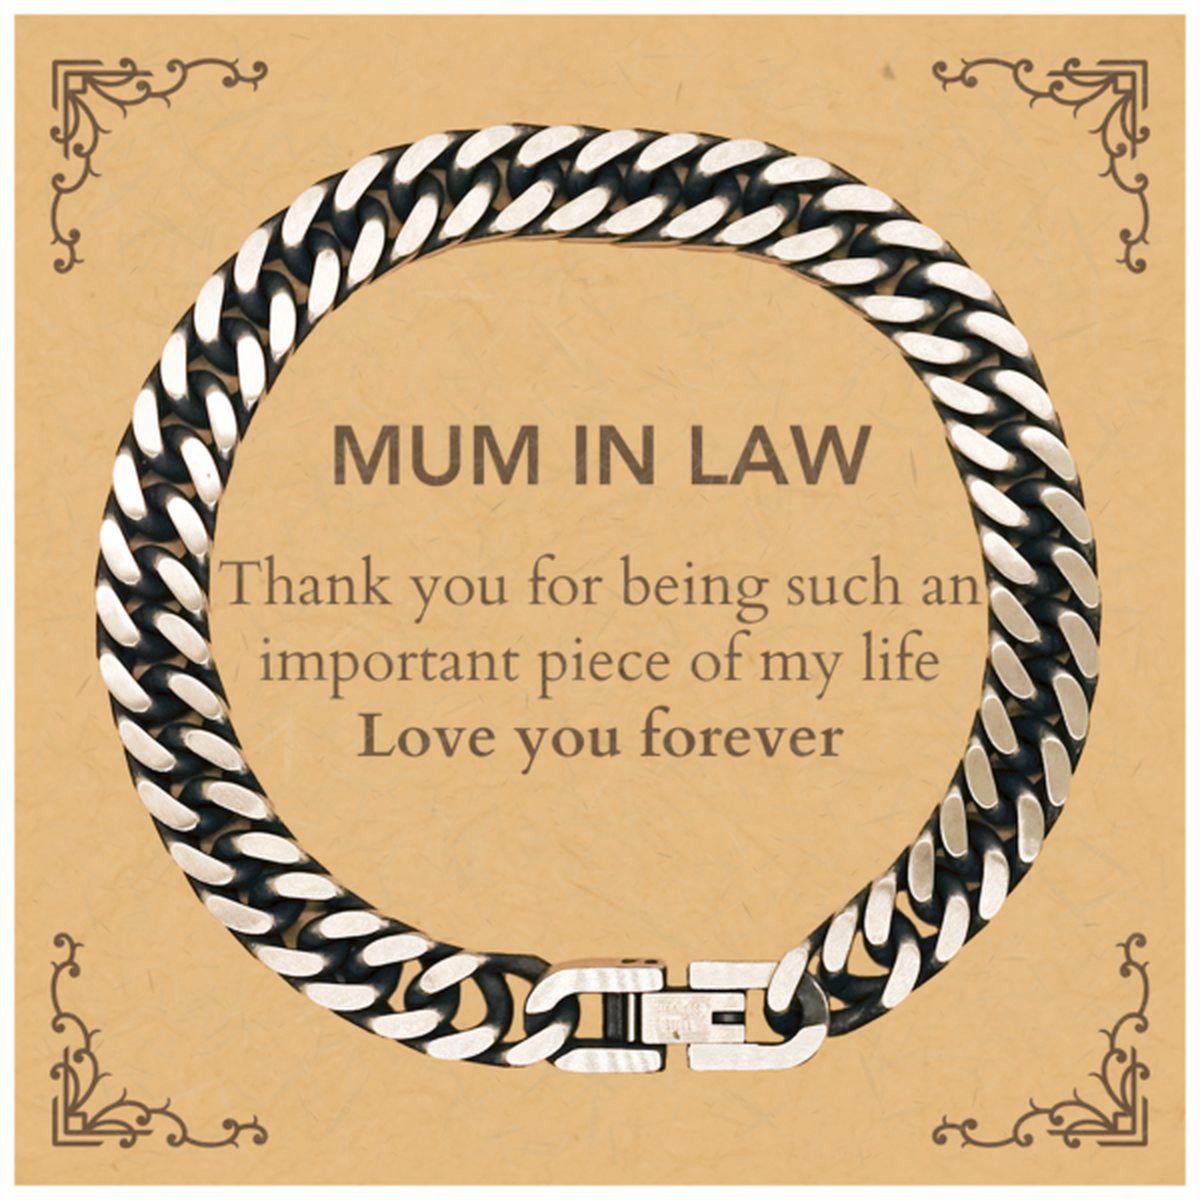 Appropriate Mum In Law  Cuban Link Chain Bracelet Epic Birthday Gifts for Mum In Law  Thank you for being such an important piece of my life Mum In Law  Christmas Mothers Fathers Day